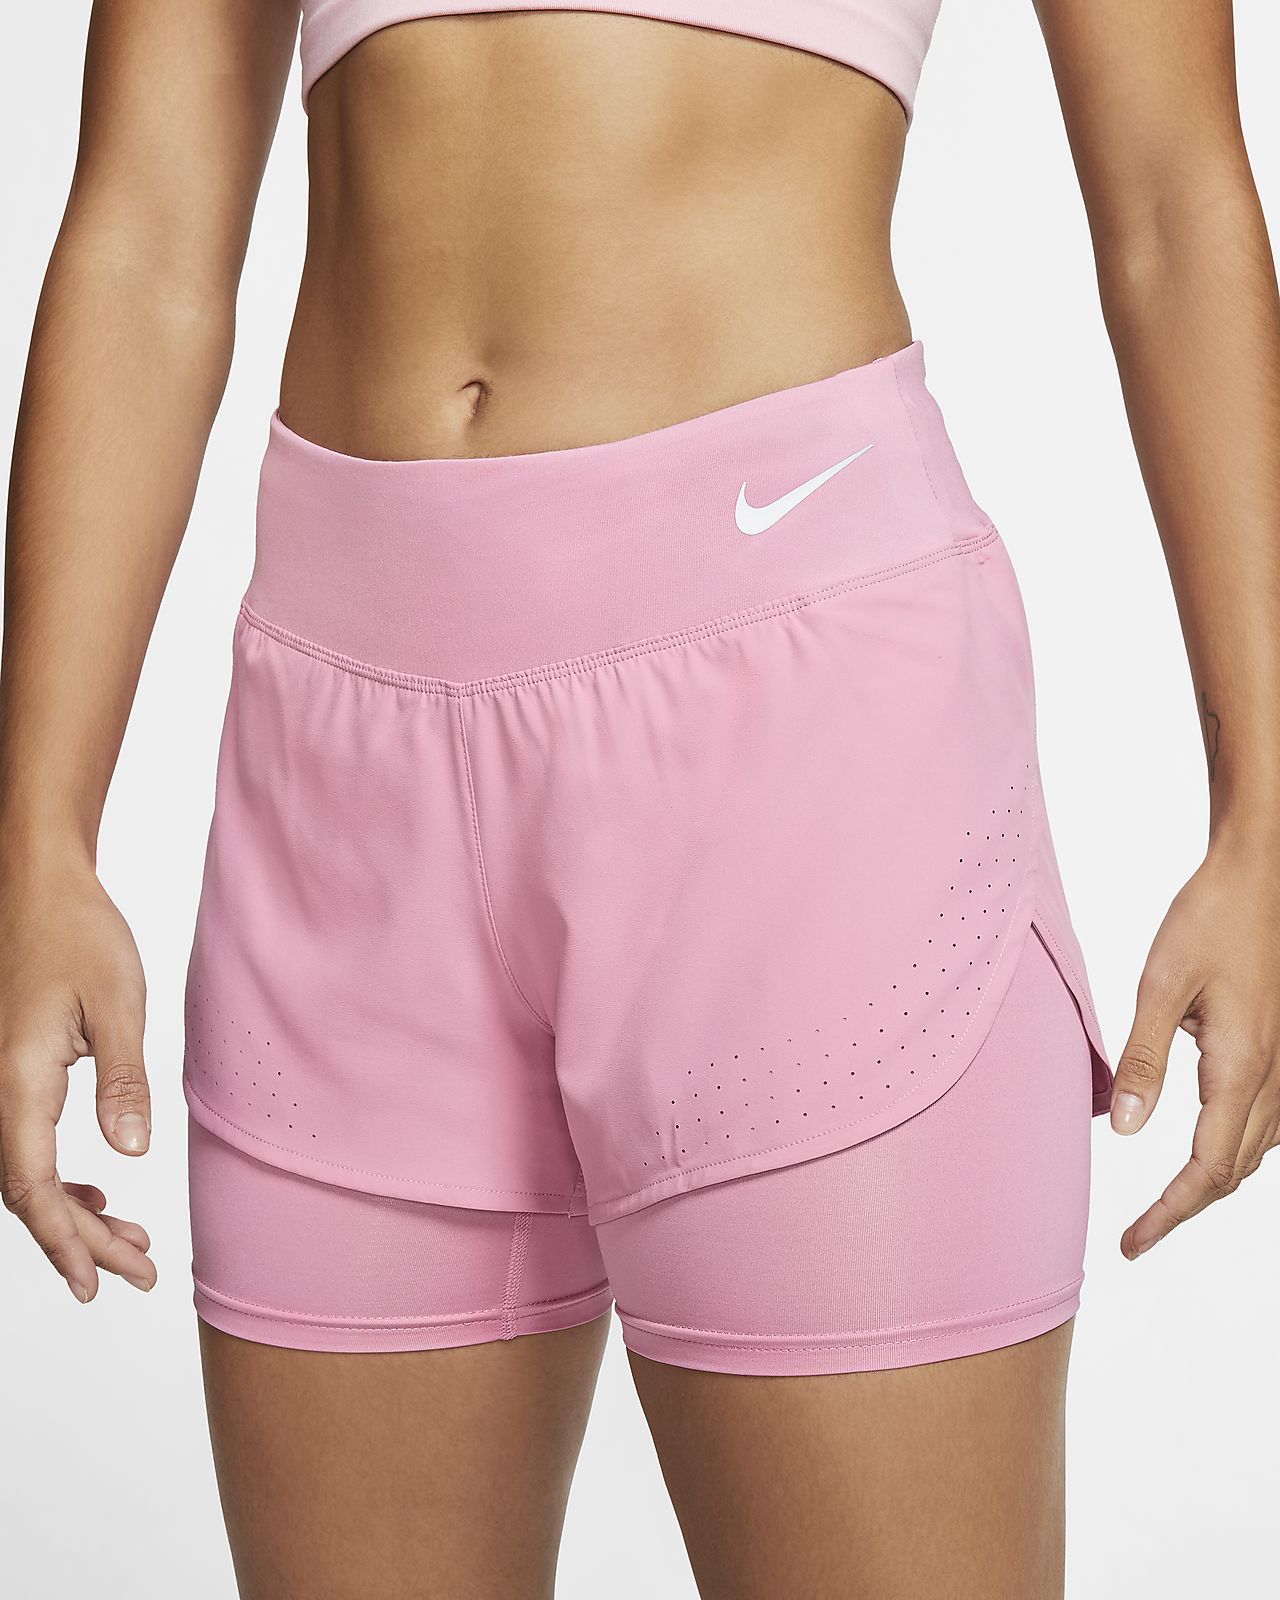 nike eclipse 2 in 1 shorts ladies